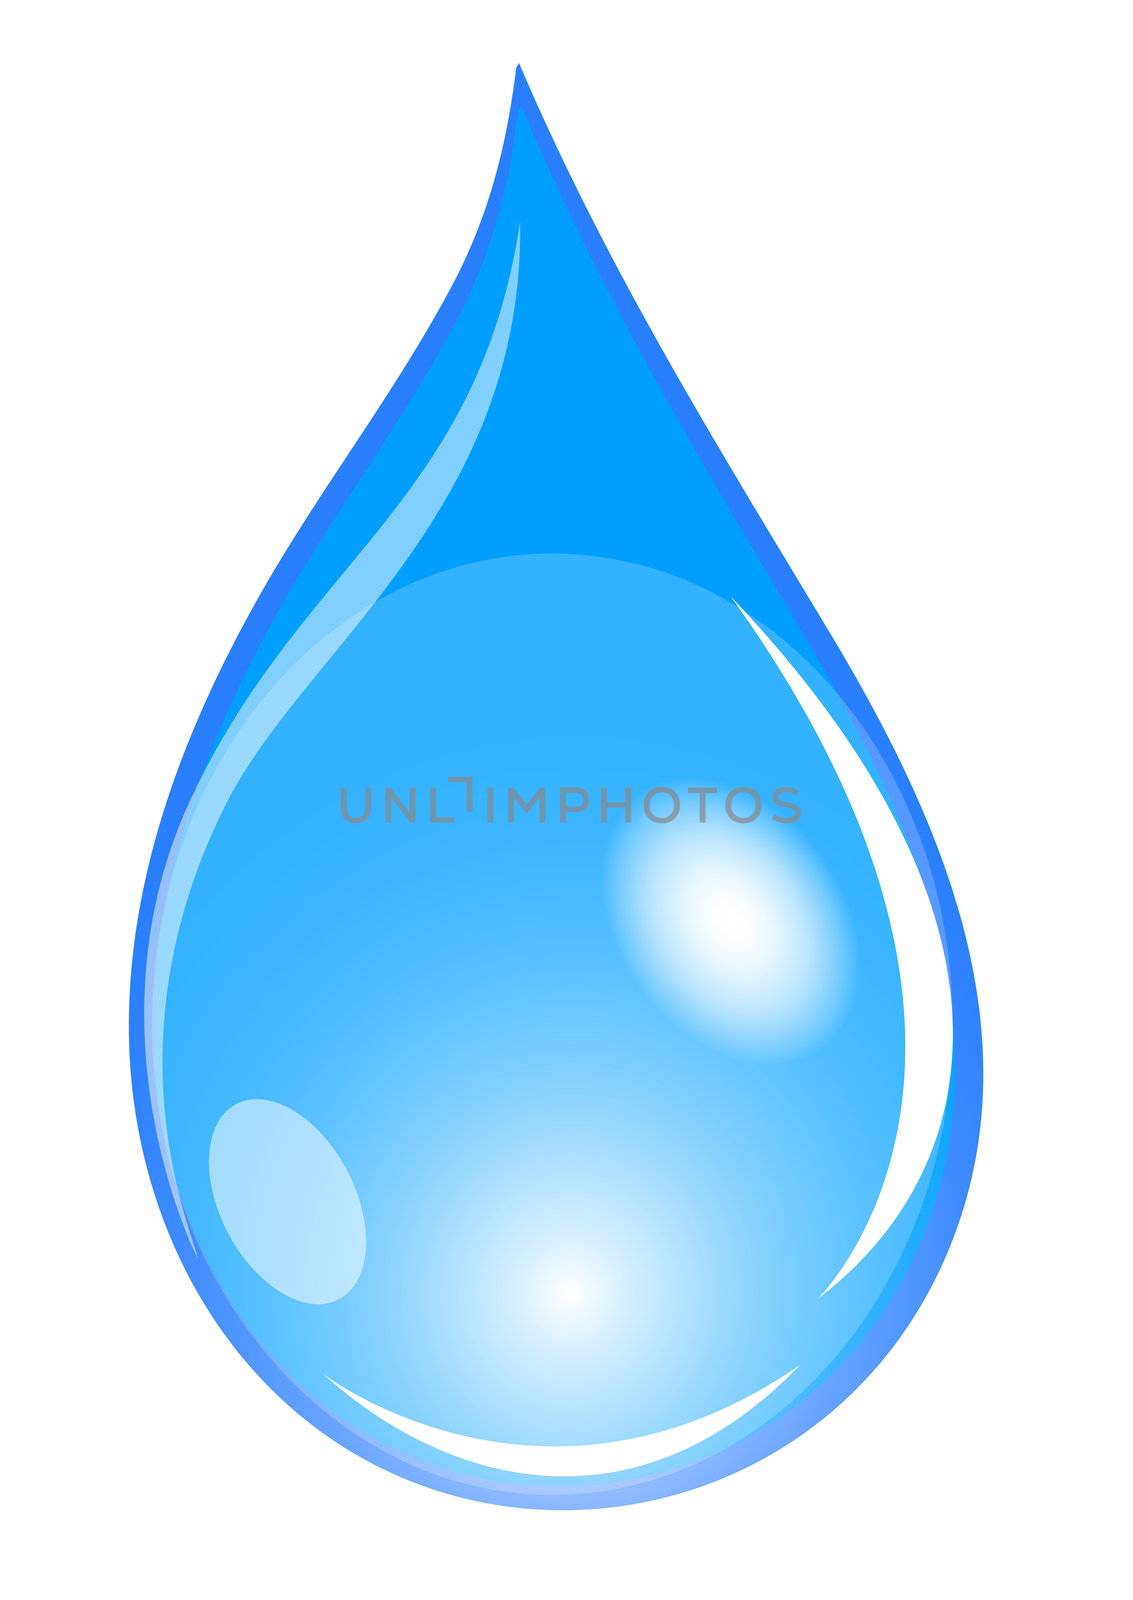 Illustration of a blue waterdrop by peromarketing